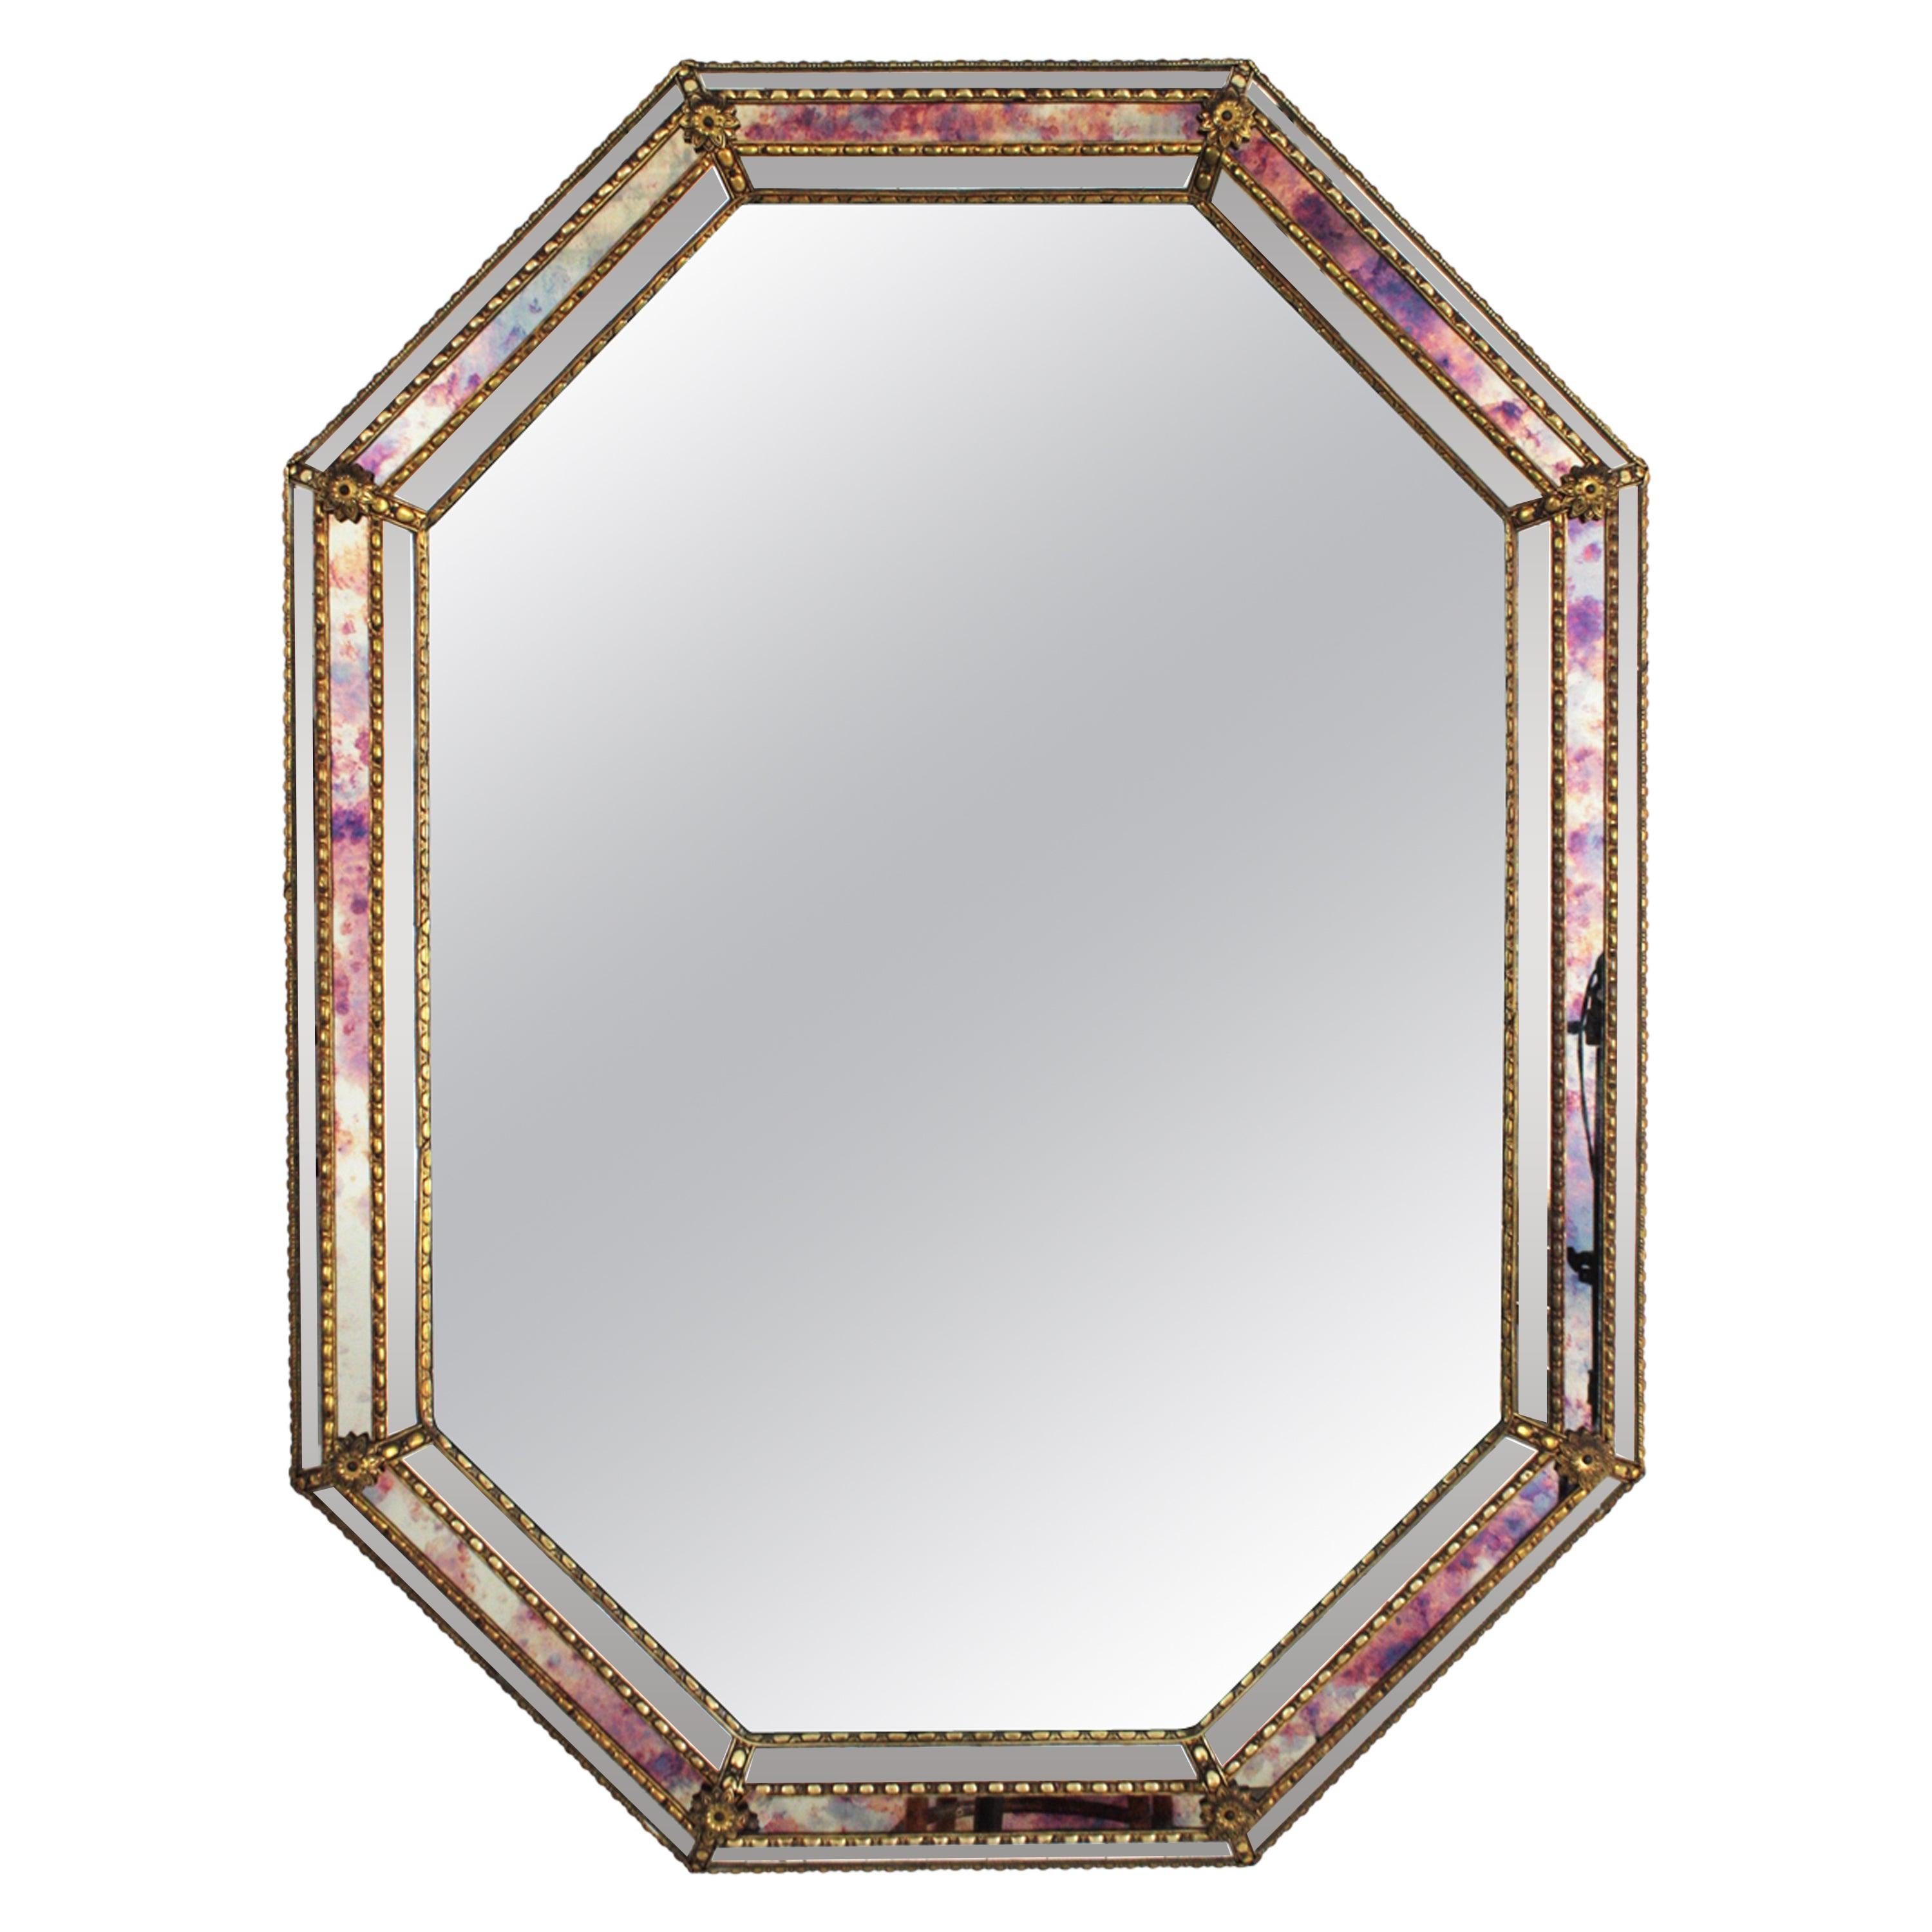 Hollywood Regency Venetian Modern Octagonal Mirror with Iridiscent Glass Accents